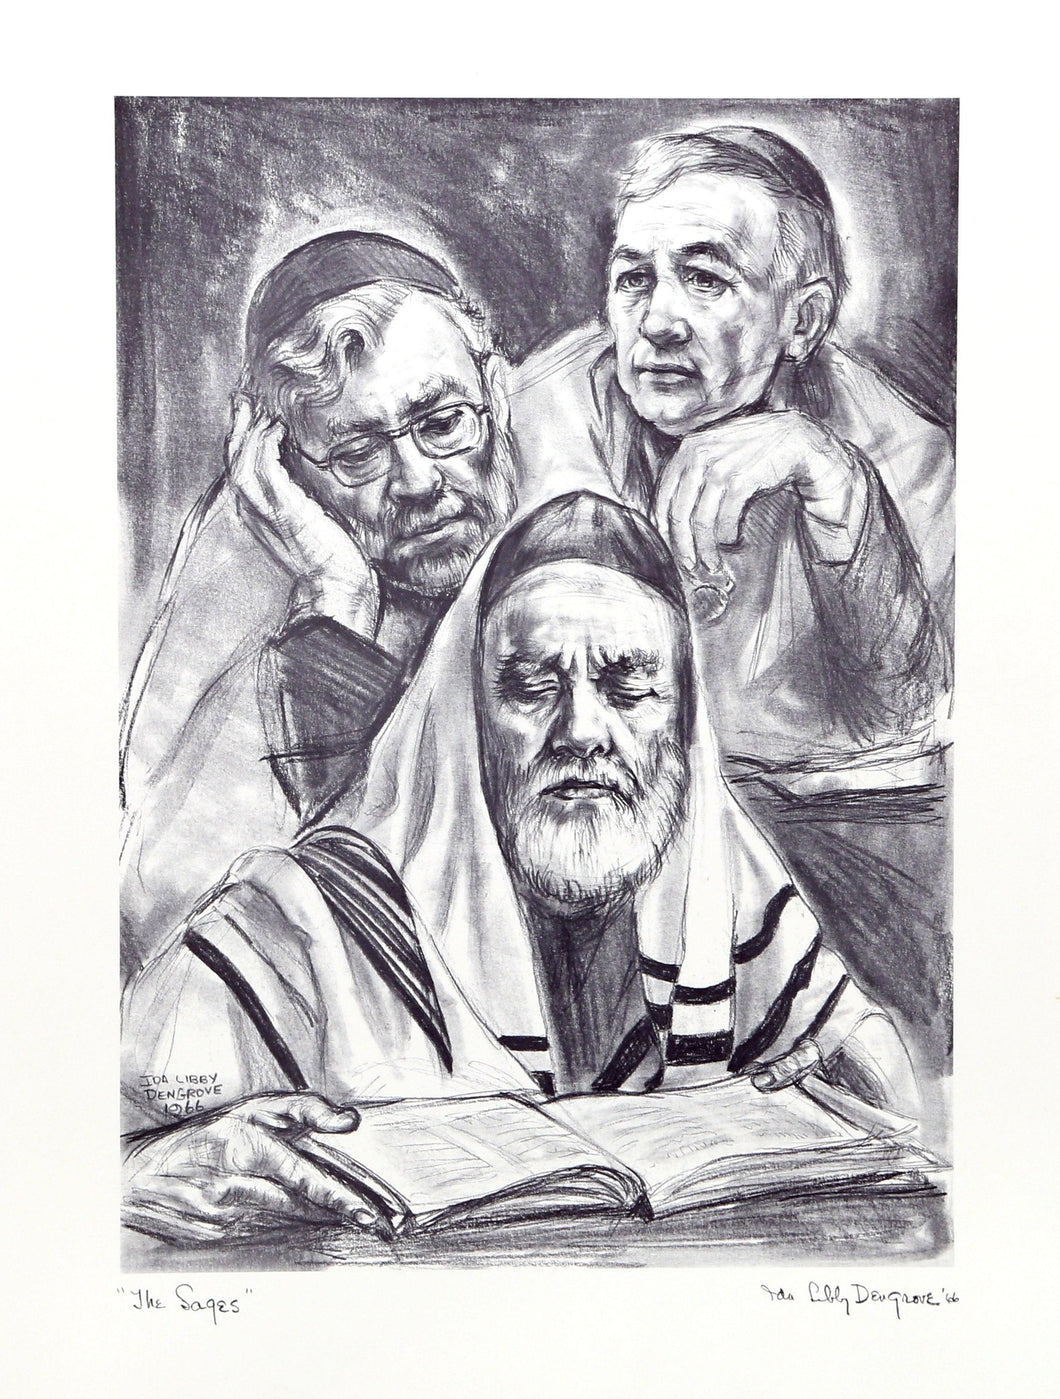 The Sages from Twelve Drawings of Jewish Life Poster | Ida Libby Dengrove,{{product.type}}